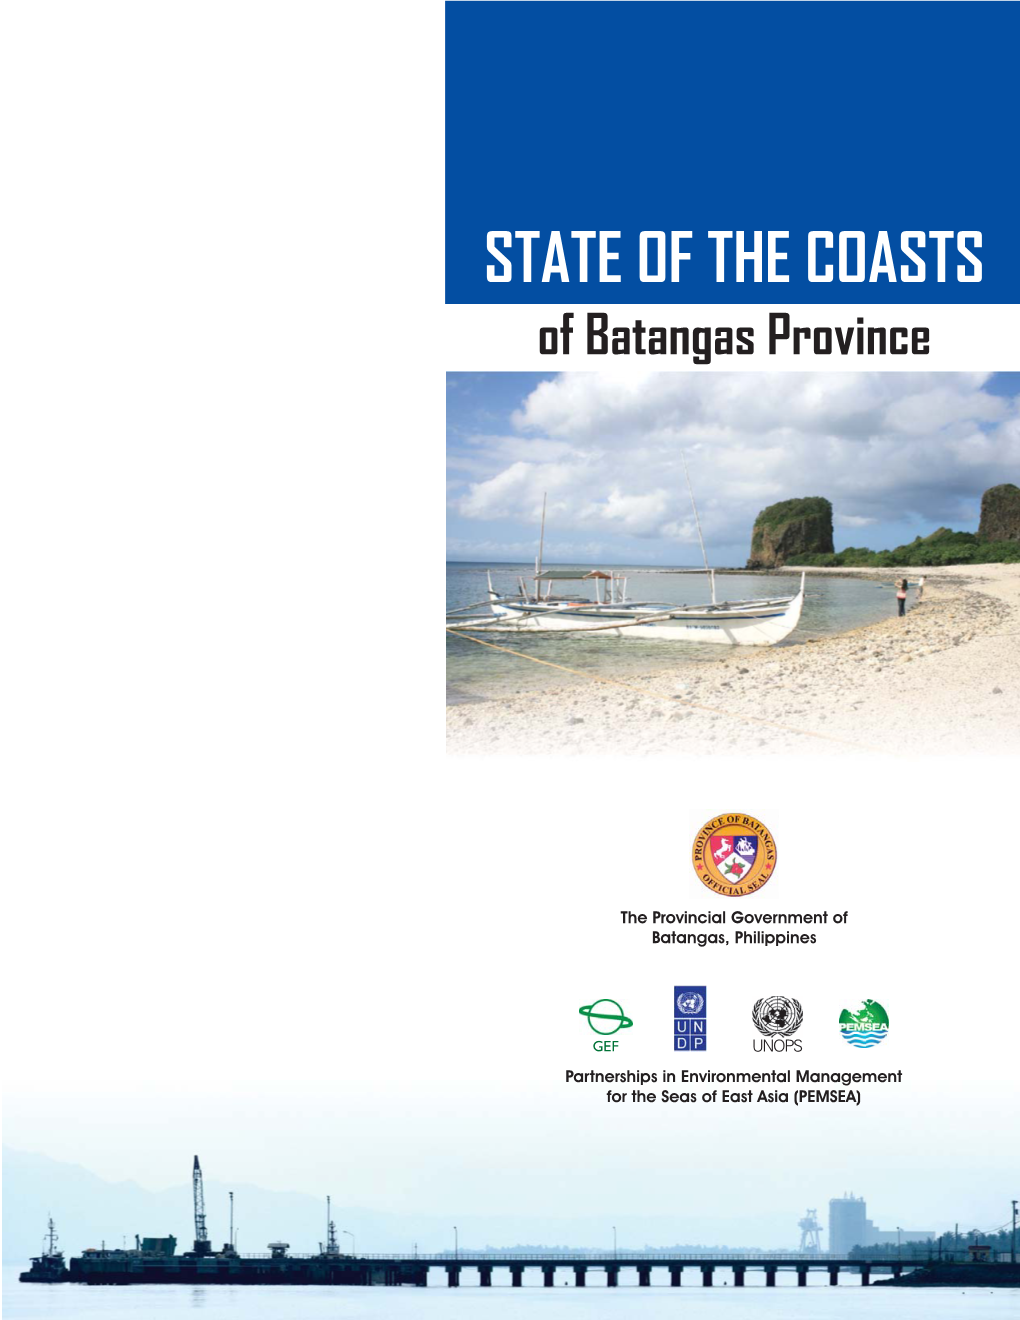 STATE of the COASTS of Batangas Province